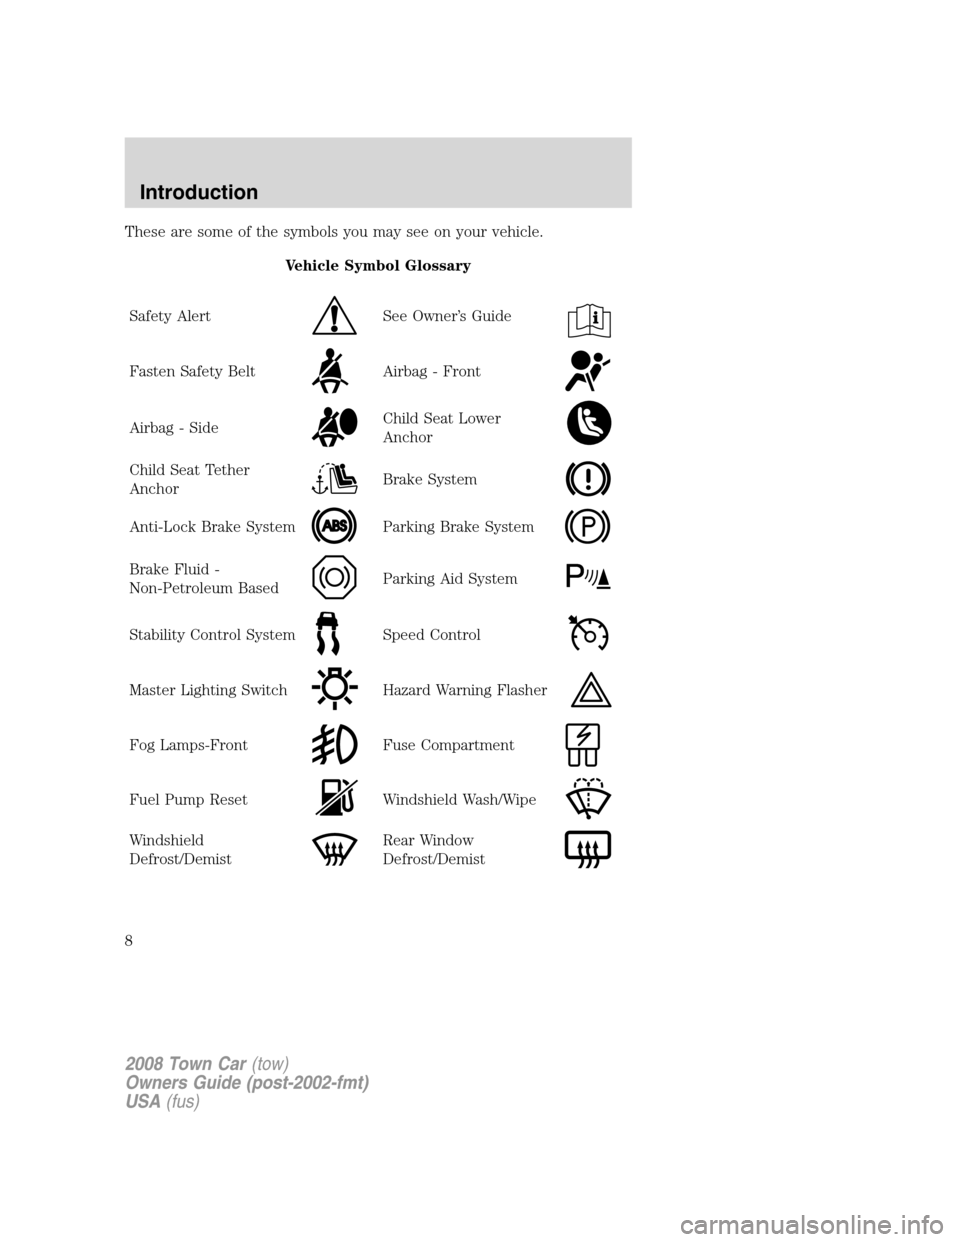 LINCOLN TOWN CAR 2008  Owners Manual These are some of the symbols you may see on your vehicle.
Vehicle Symbol Glossary
Safety Alert
See Owner’s Guide
Fasten Safety BeltAirbag - Front
Airbag - SideChild Seat Lower
Anchor
Child Seat Tet